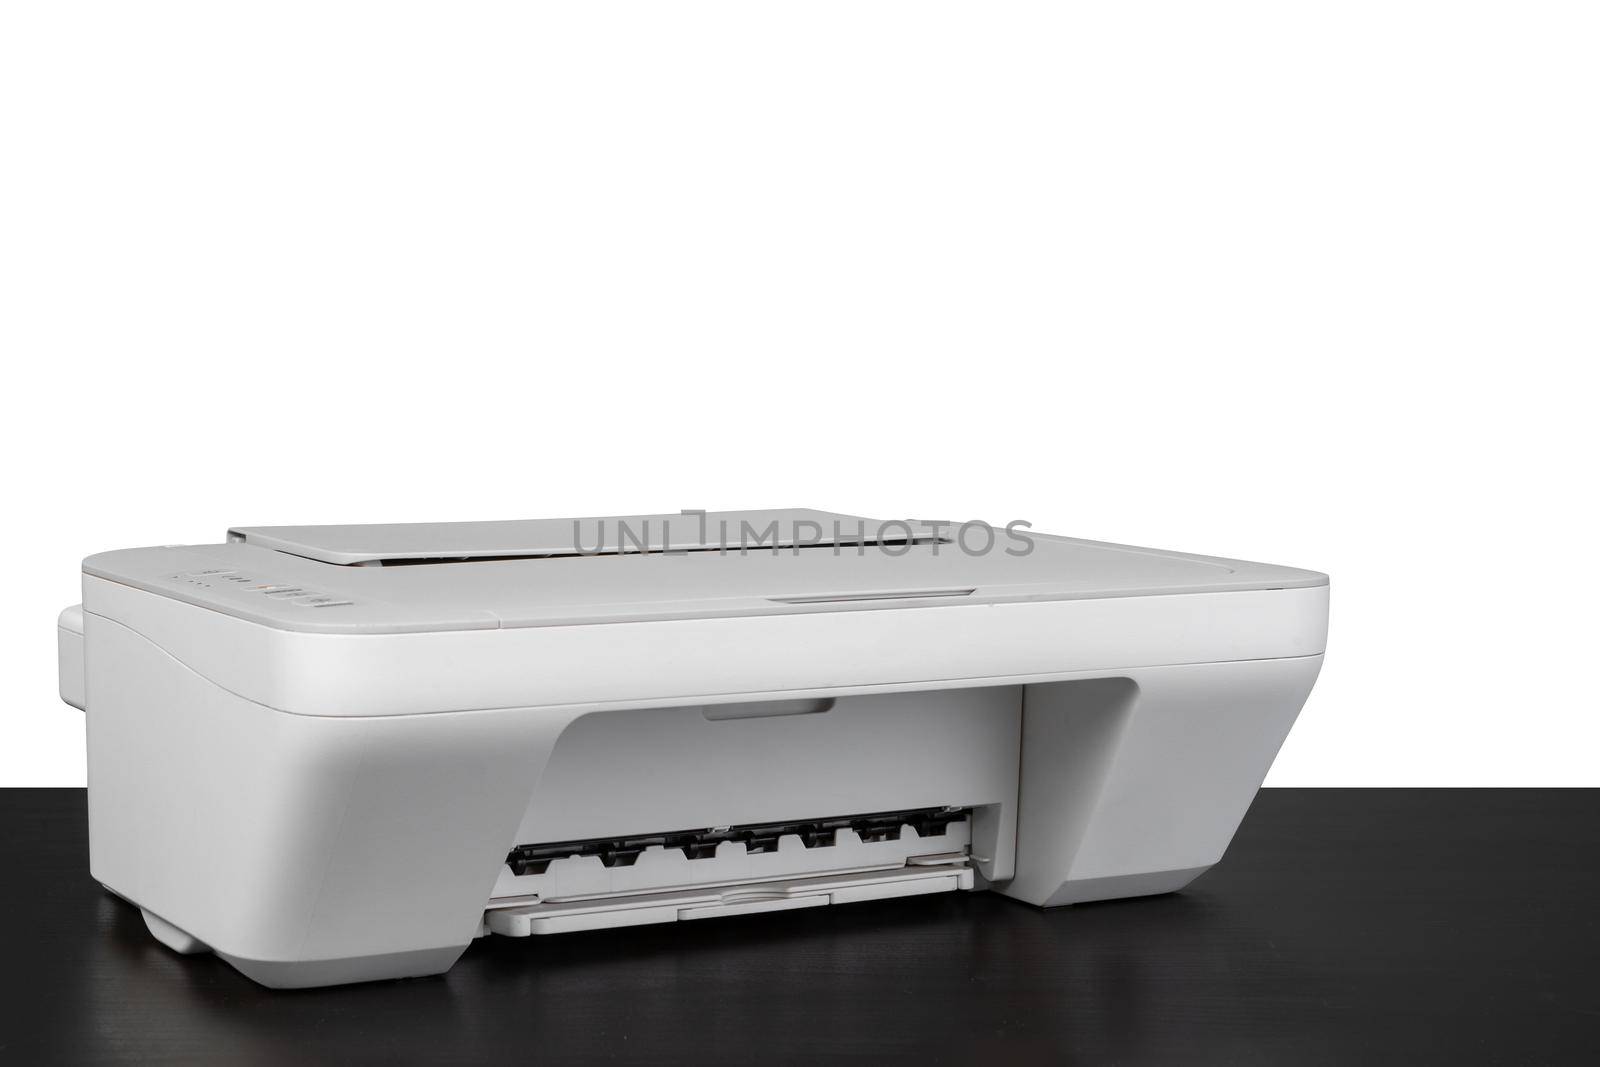 Laser home printer on table against white backgorund by Fabrikasimf